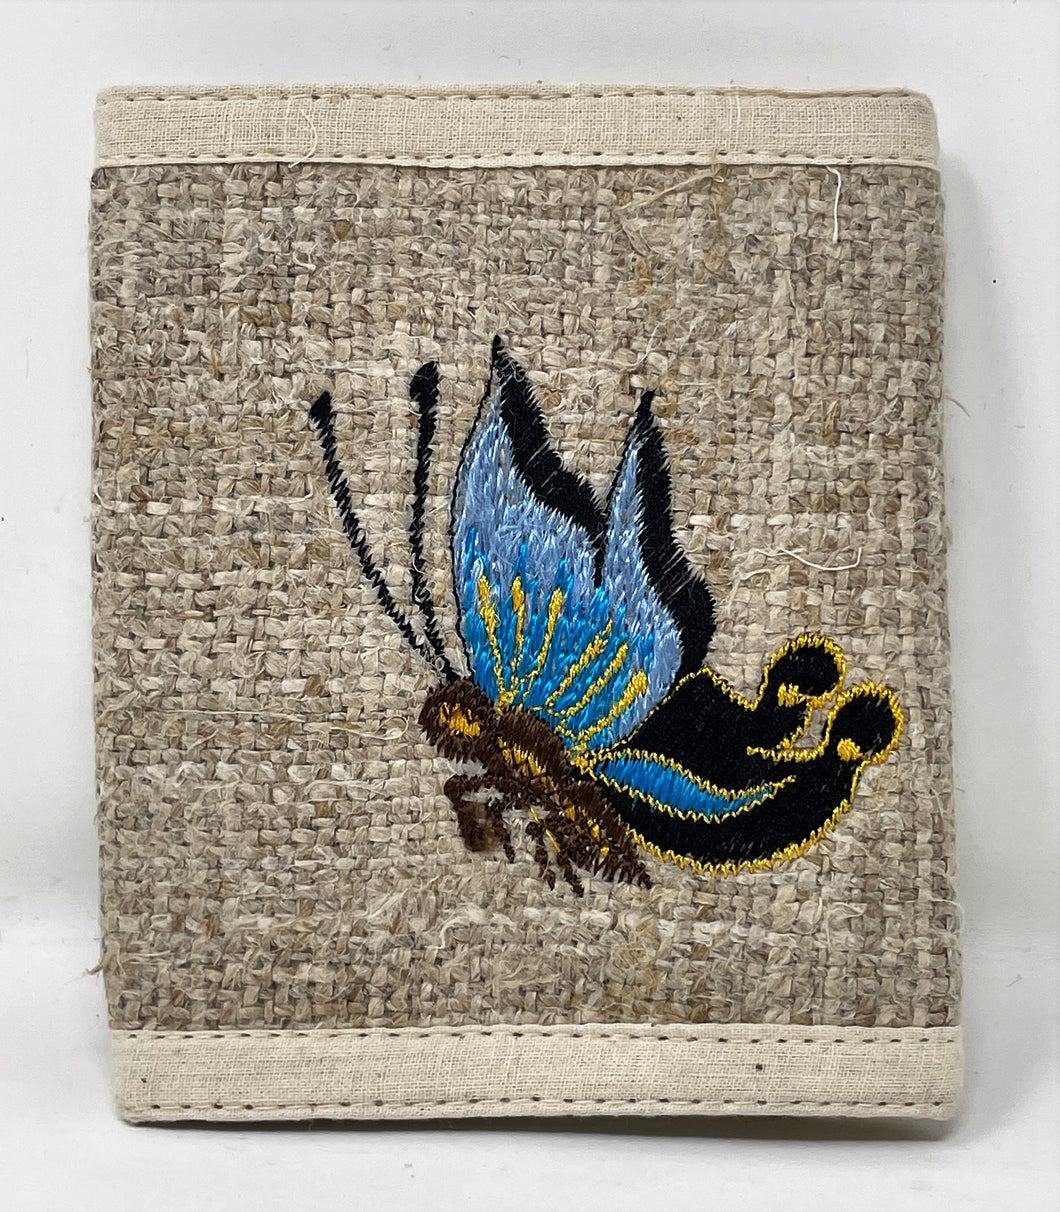 Handmade Hemp Wallet with Embroidered Butterfly Design